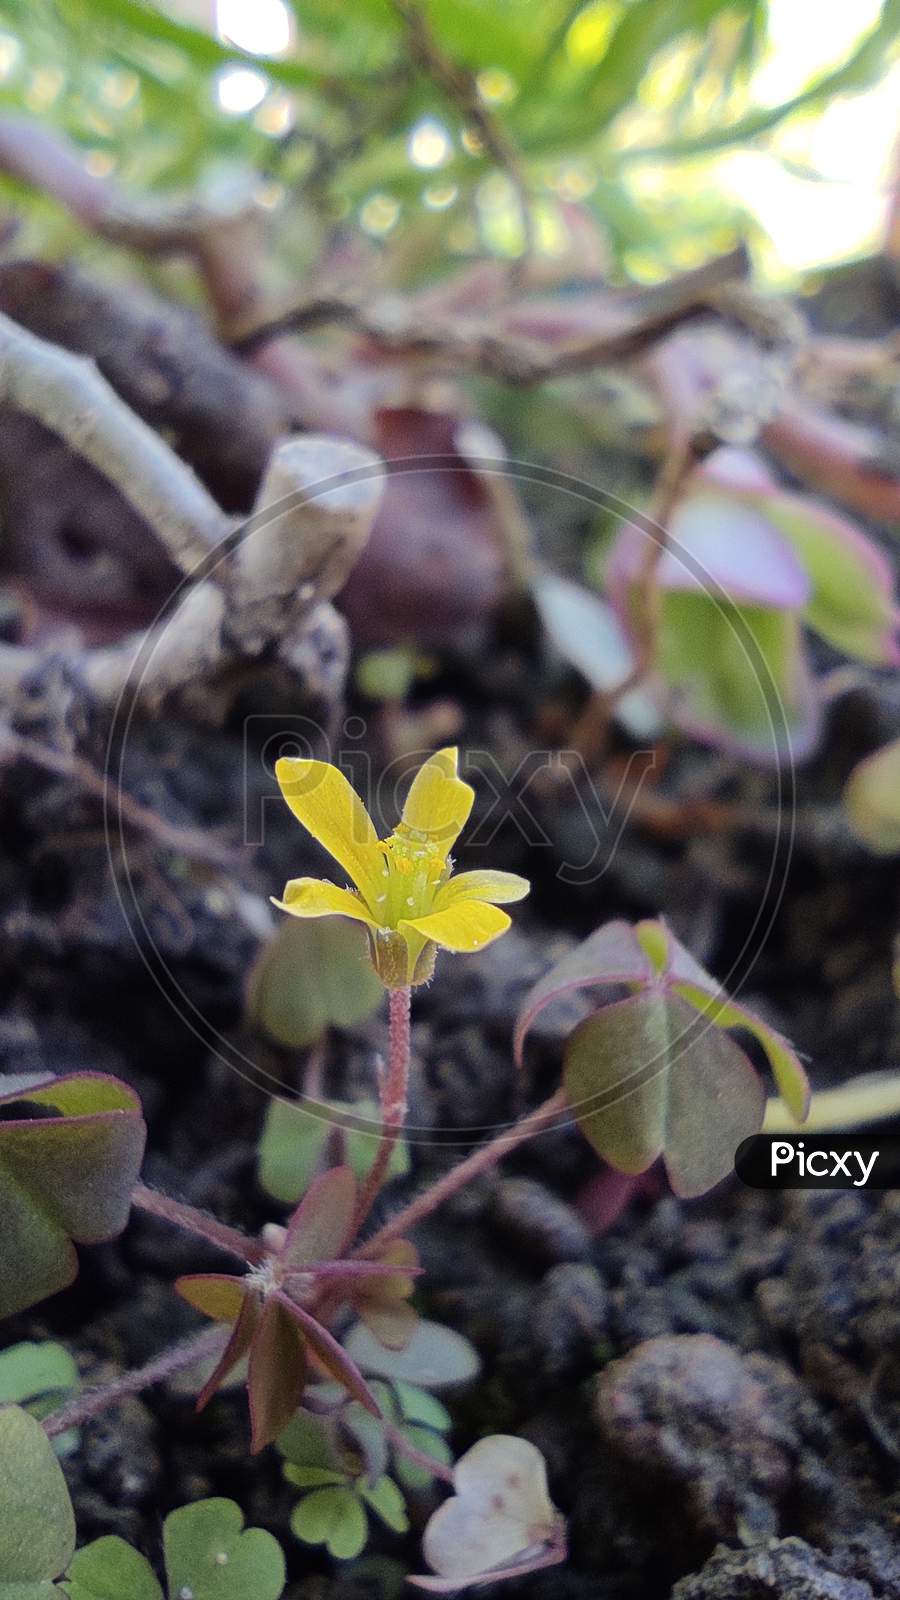 A tiny yellow flower